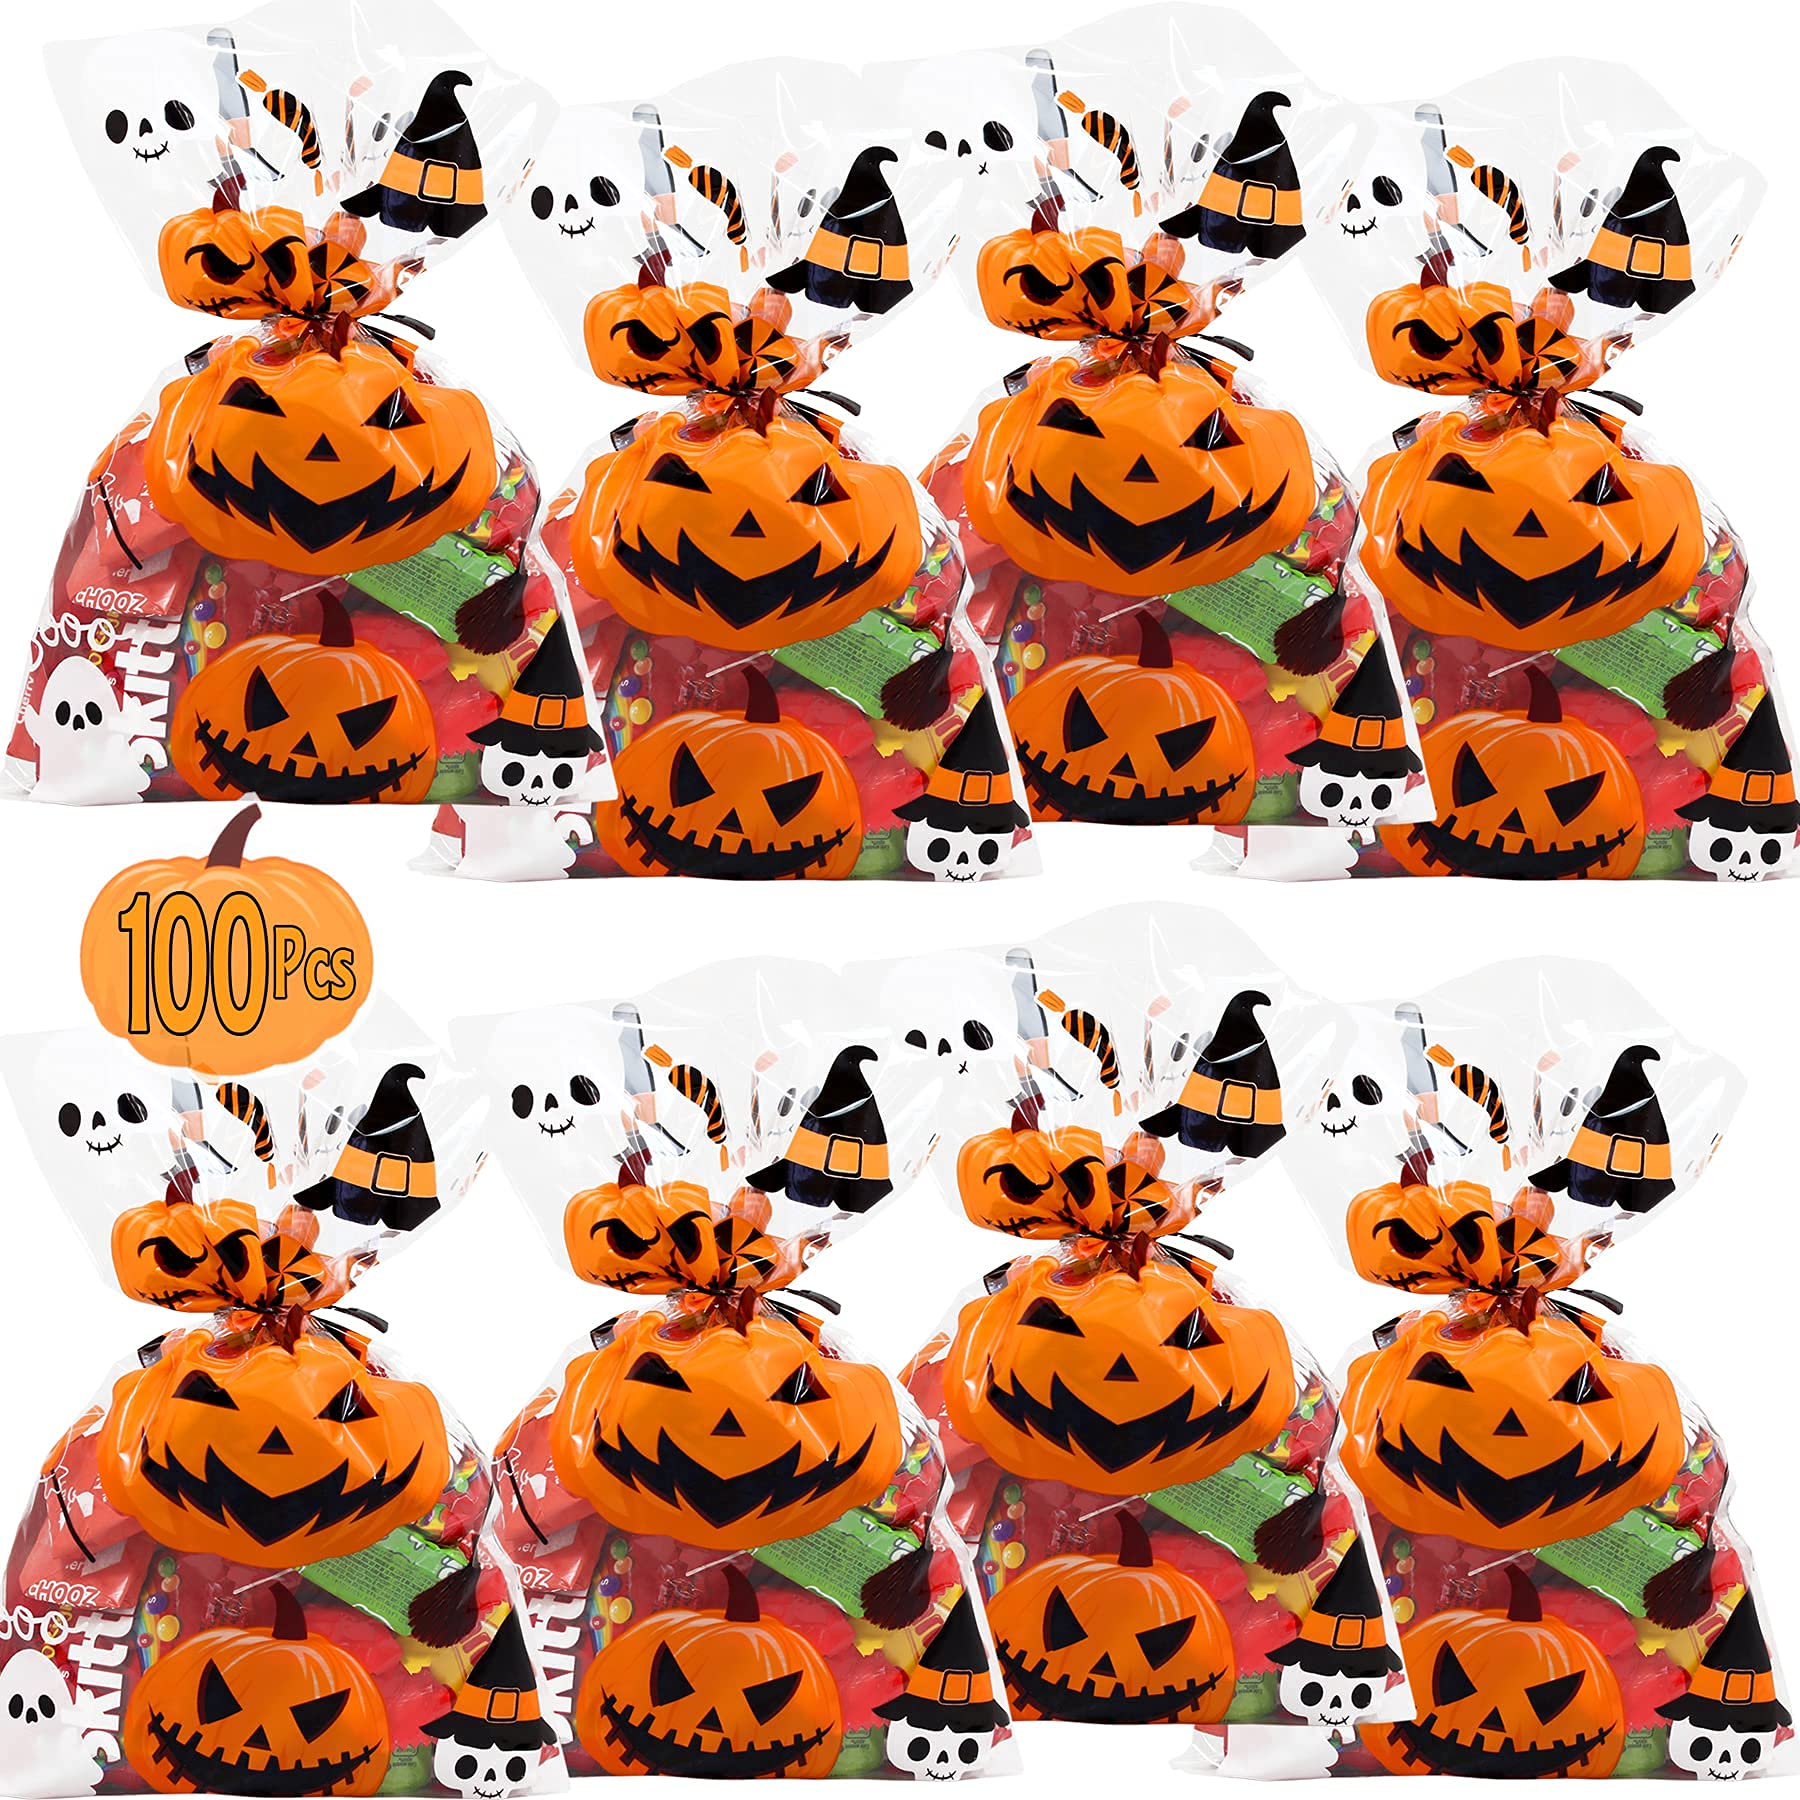 AnapoliZ Halloween Treat Bags | 100 pcs (6” x 9” Inch) |2.5 Mil Crystal Clear Cellophane Bags with Fun Scary Designs | Pumpkins, Witches Cello Bags | Halloween Party Decorations, Spooky Treat Bags